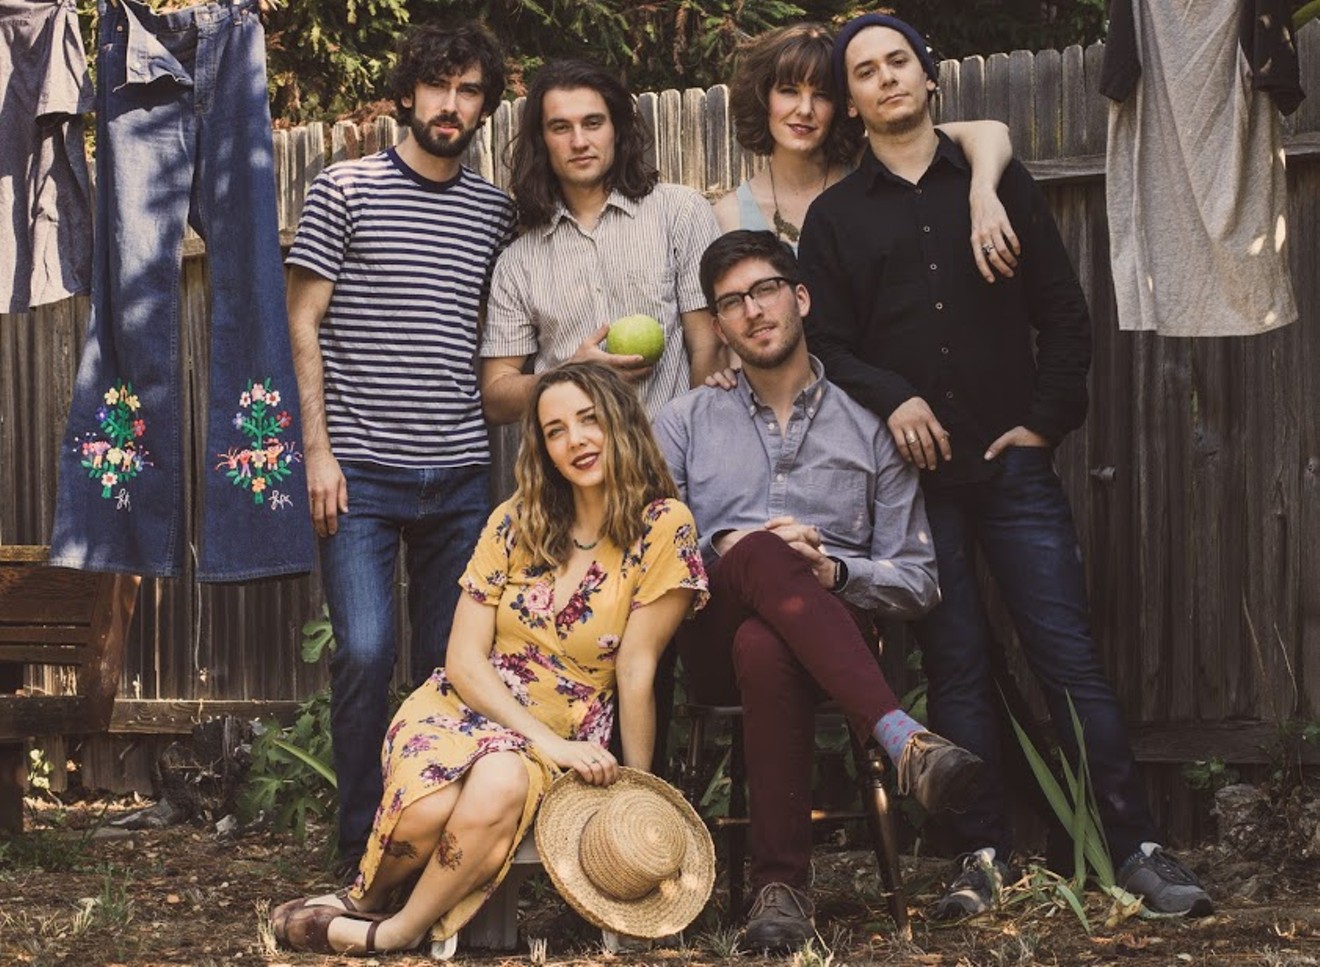 Denver indie-jazz sextet Mama Magnolia is set to release its new EP this month.